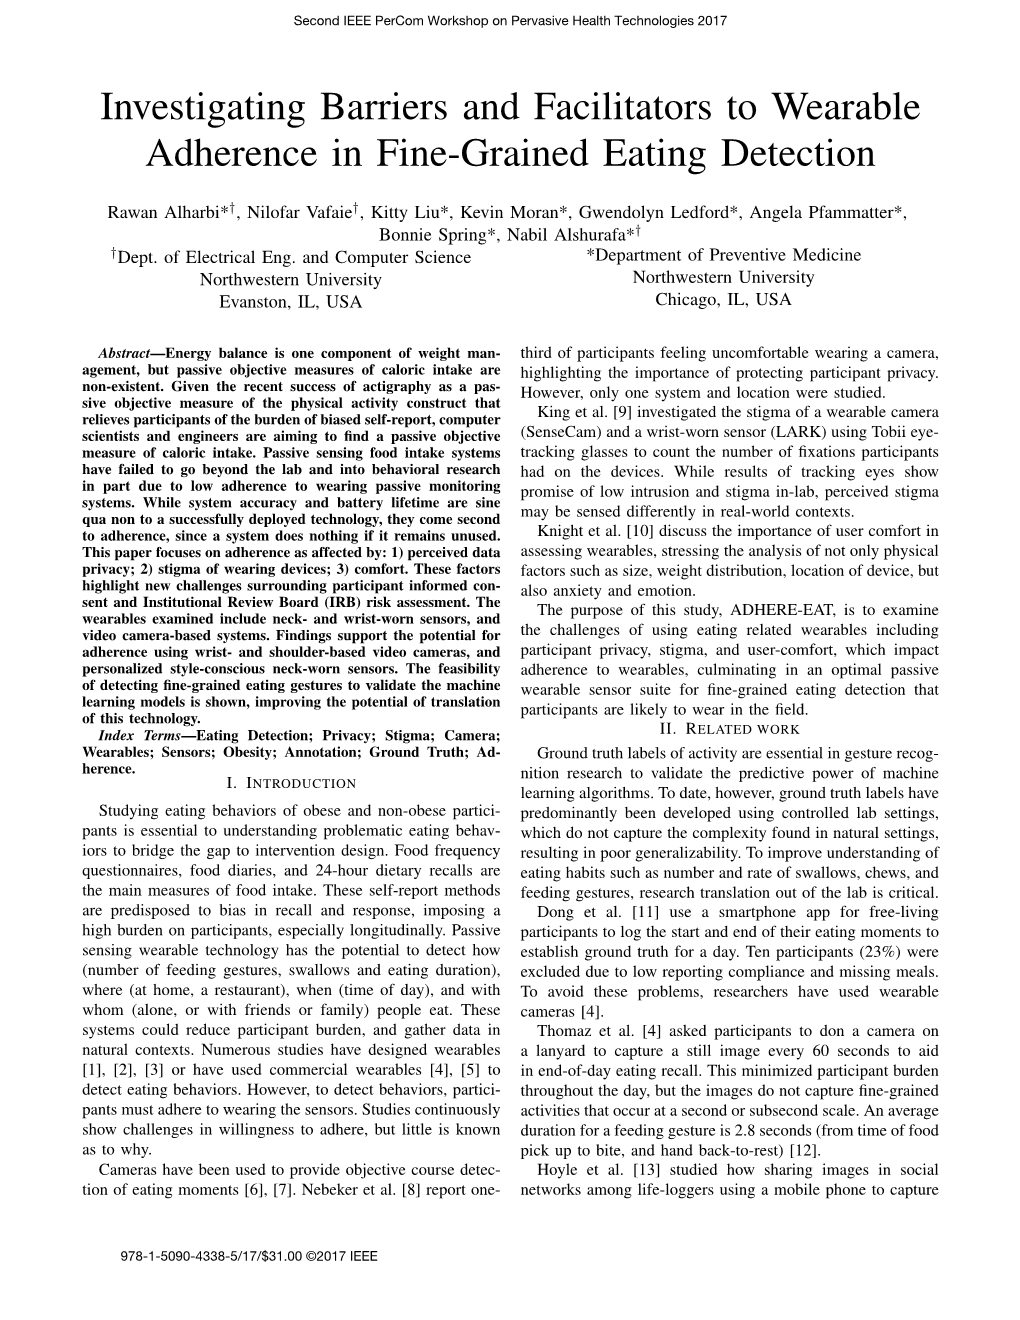 Investigating Barriers and Facilitators to Wearable Adherence in Fine-Grained Eating Detection